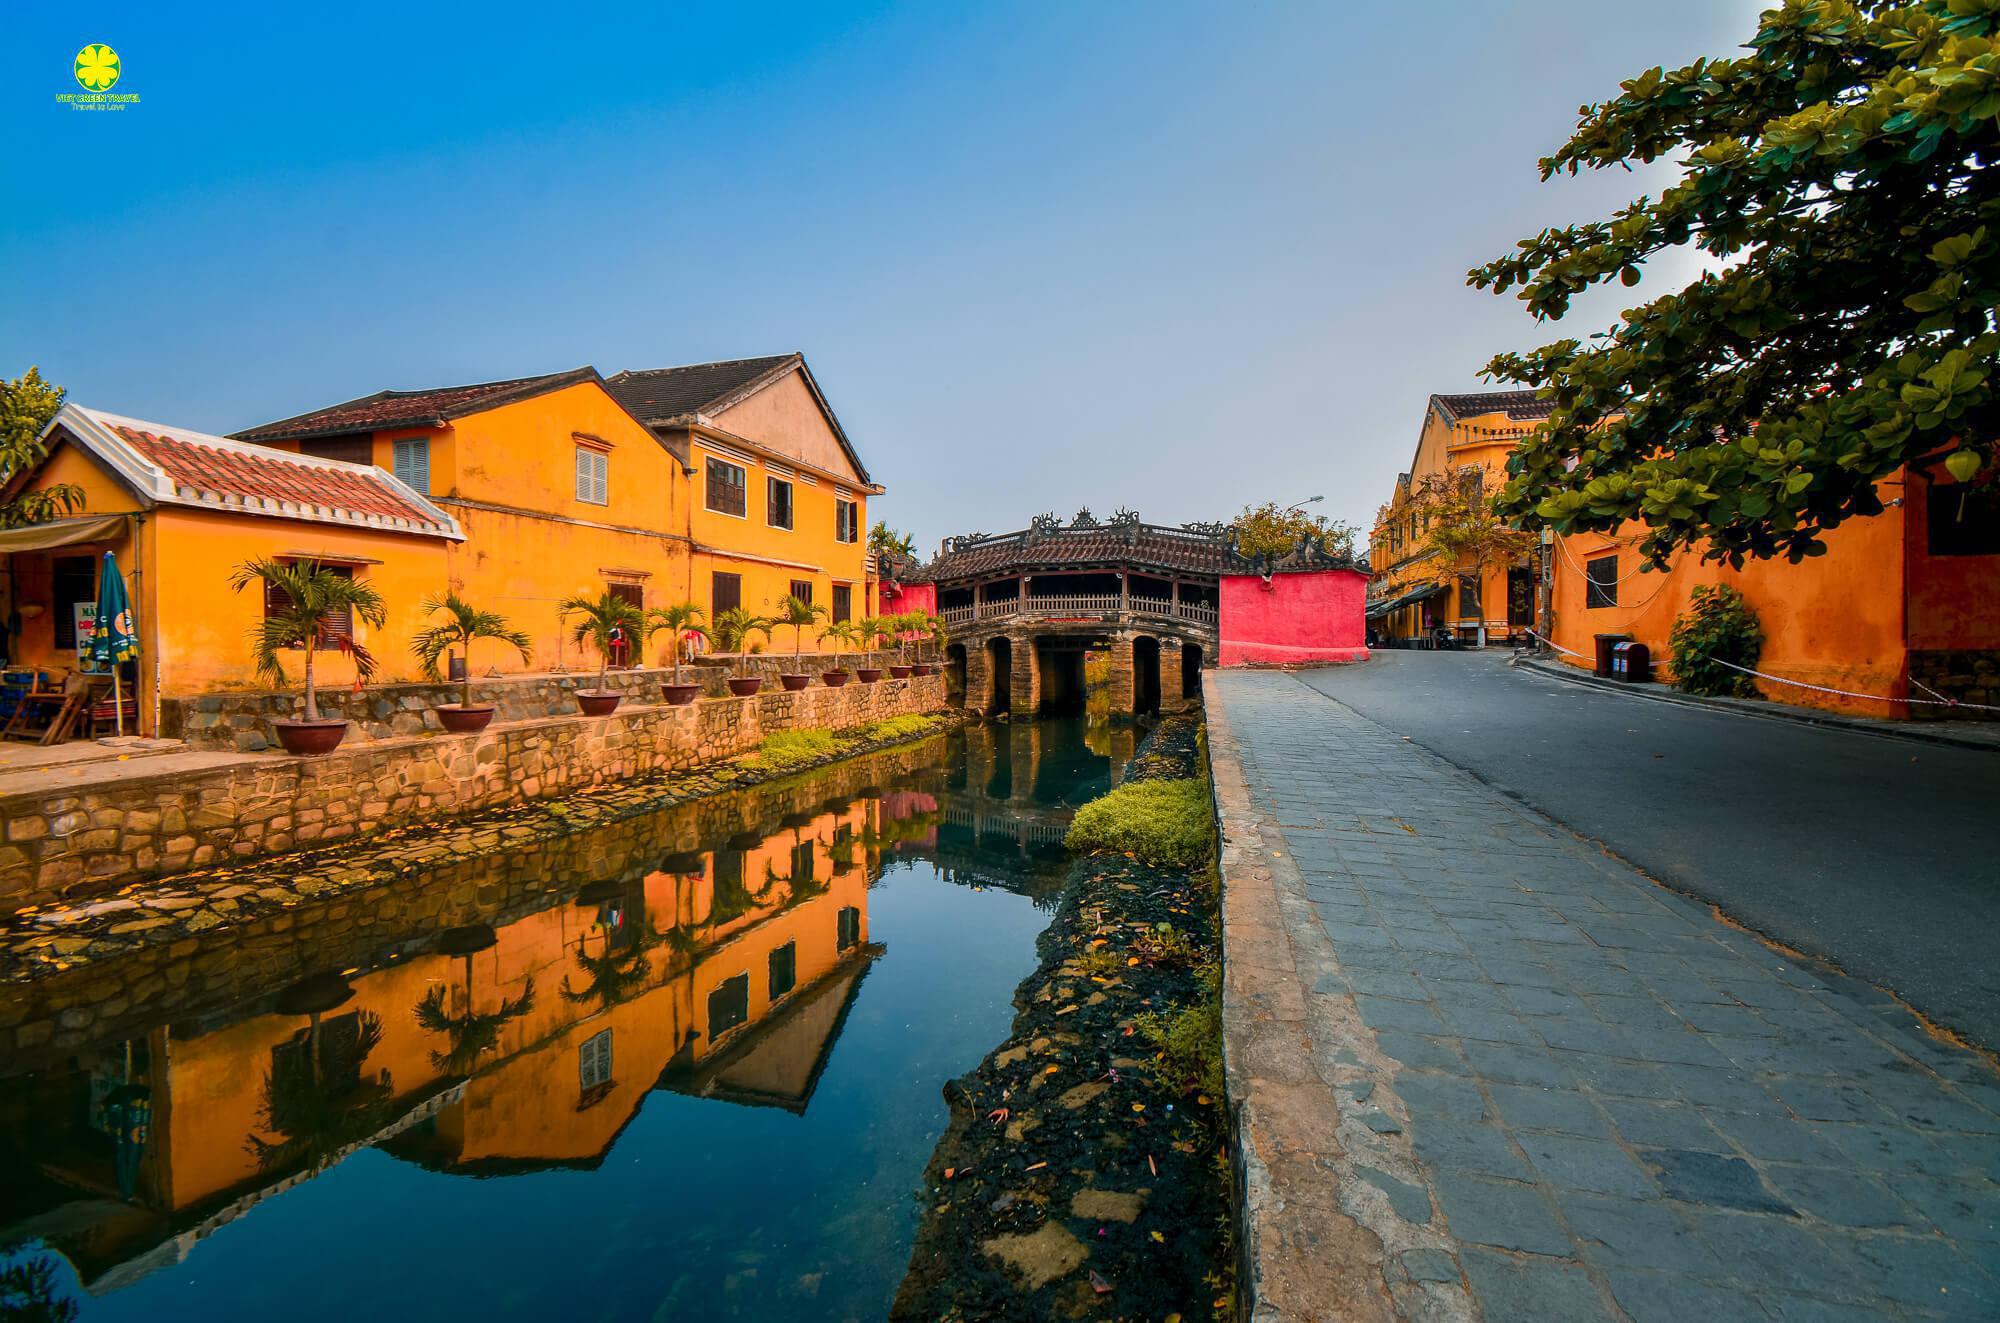 Hoi An - The ideal place for lovers of romance.